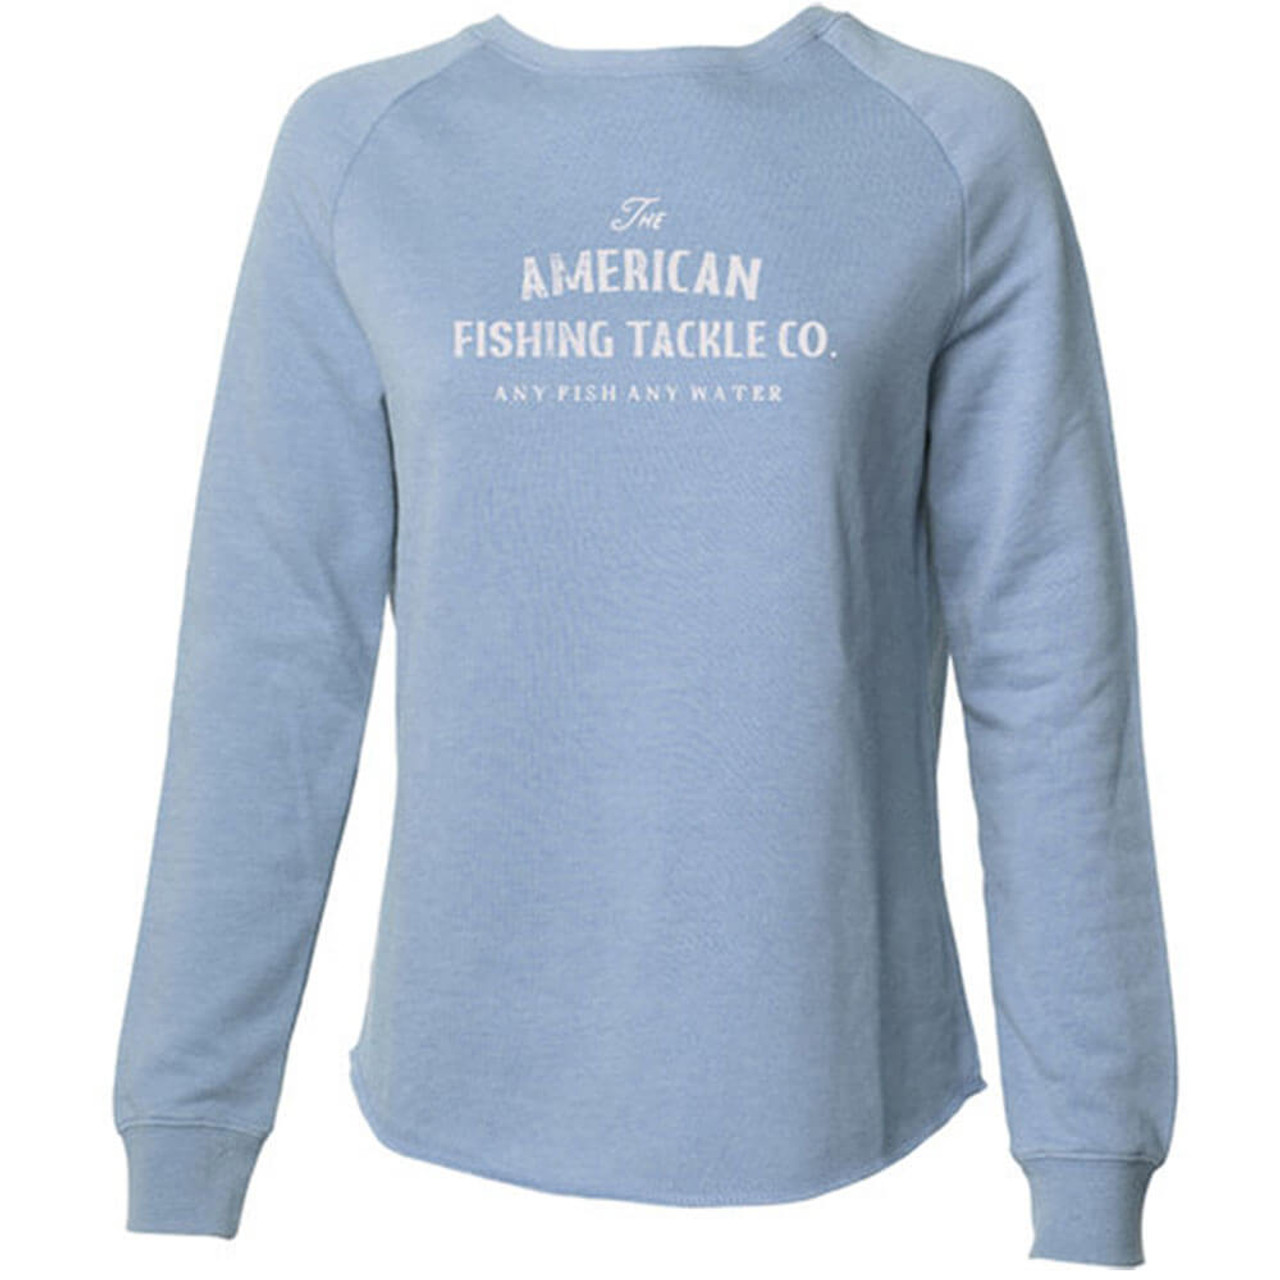 https://cdn11.bigcommerce.com/s-zut1msomd6/images/stencil/1280x1280/products/25557/207693/aftco-womens-whiskey-crew-lblu-light-blue-front-main__59657.1643744022.jpg?c=1